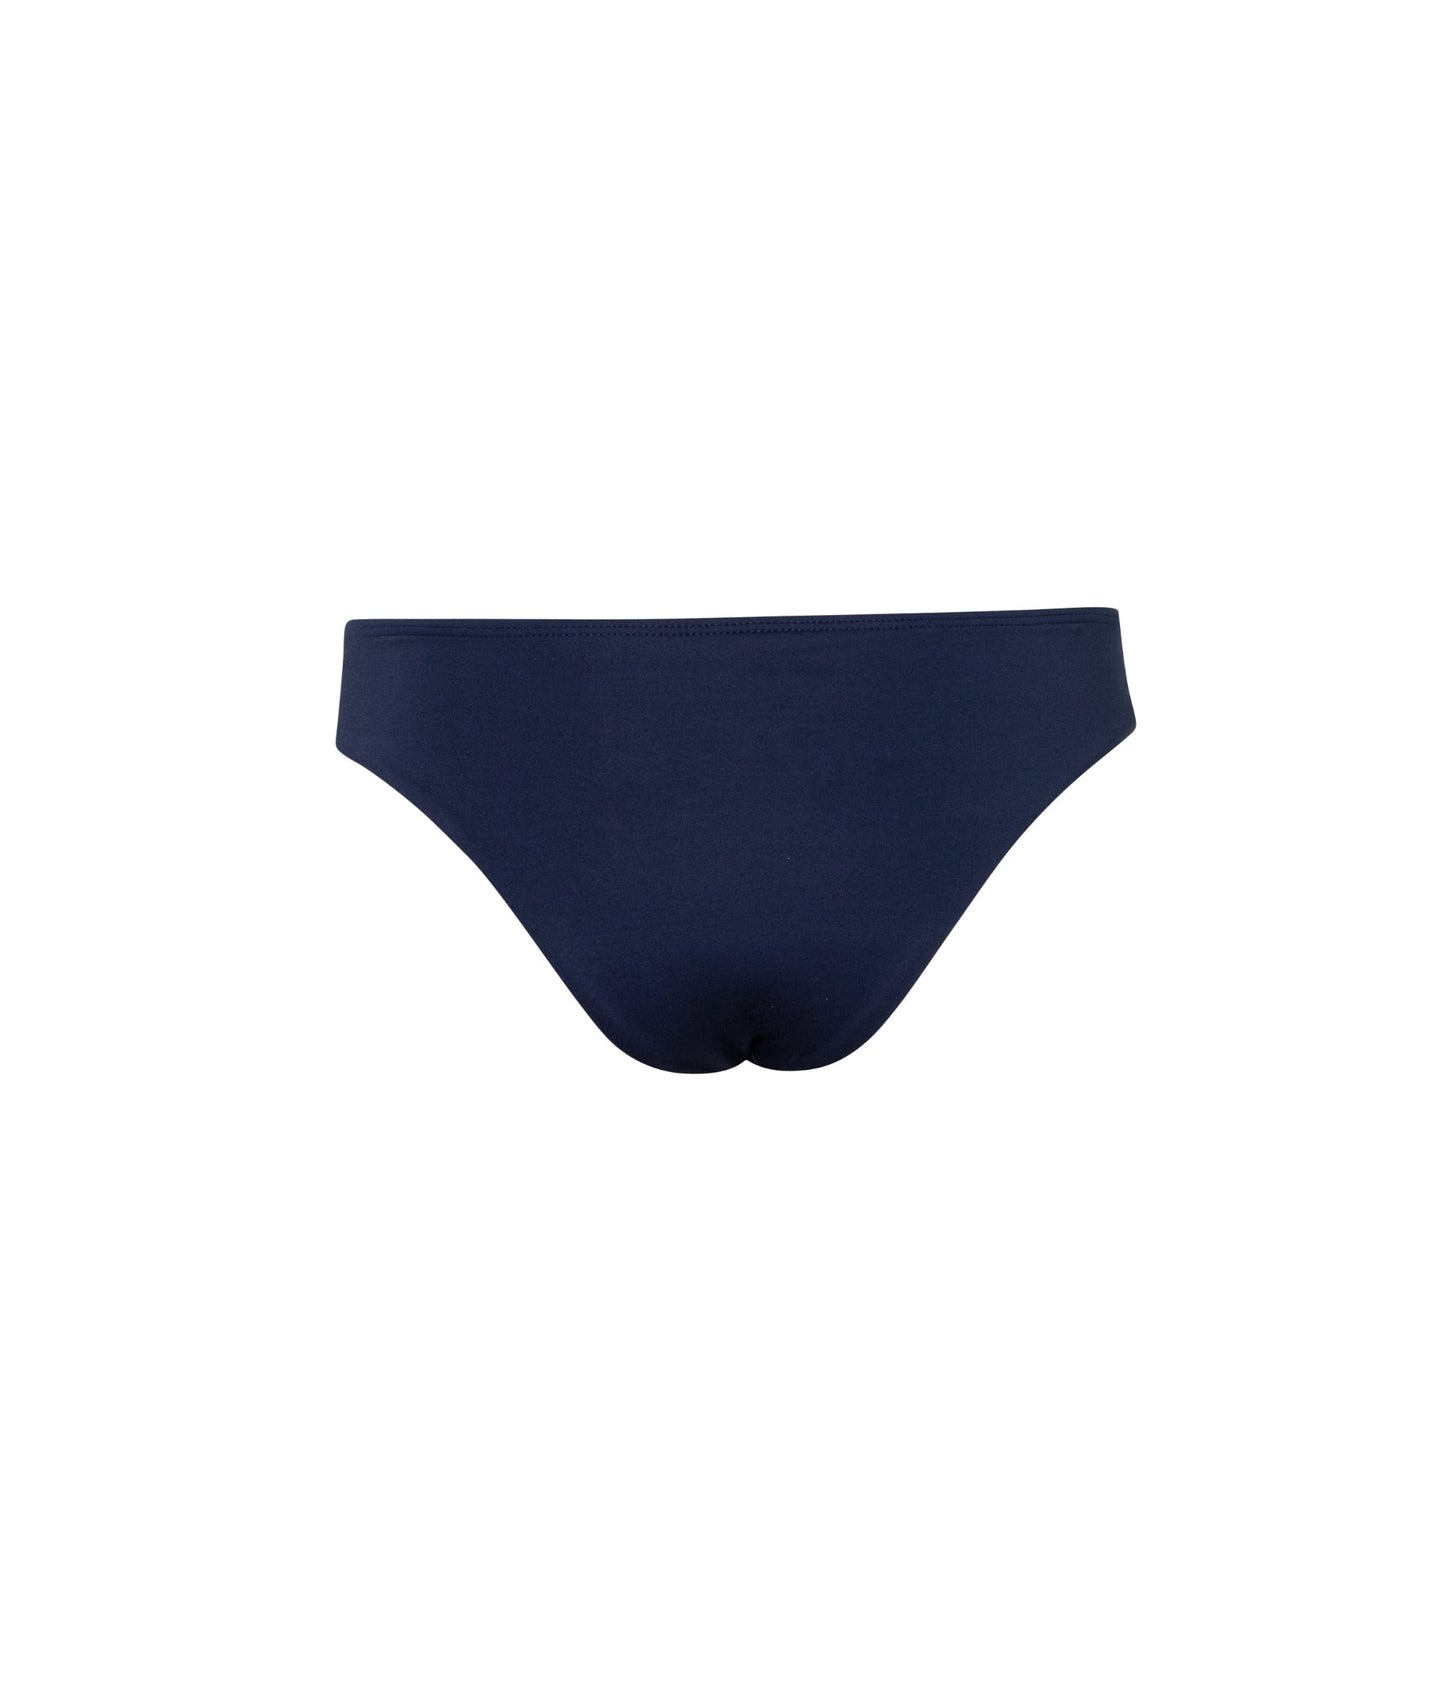 Verdelimon - Bottom - Tunas  - Les Coquettes - Navy French Waves - Back